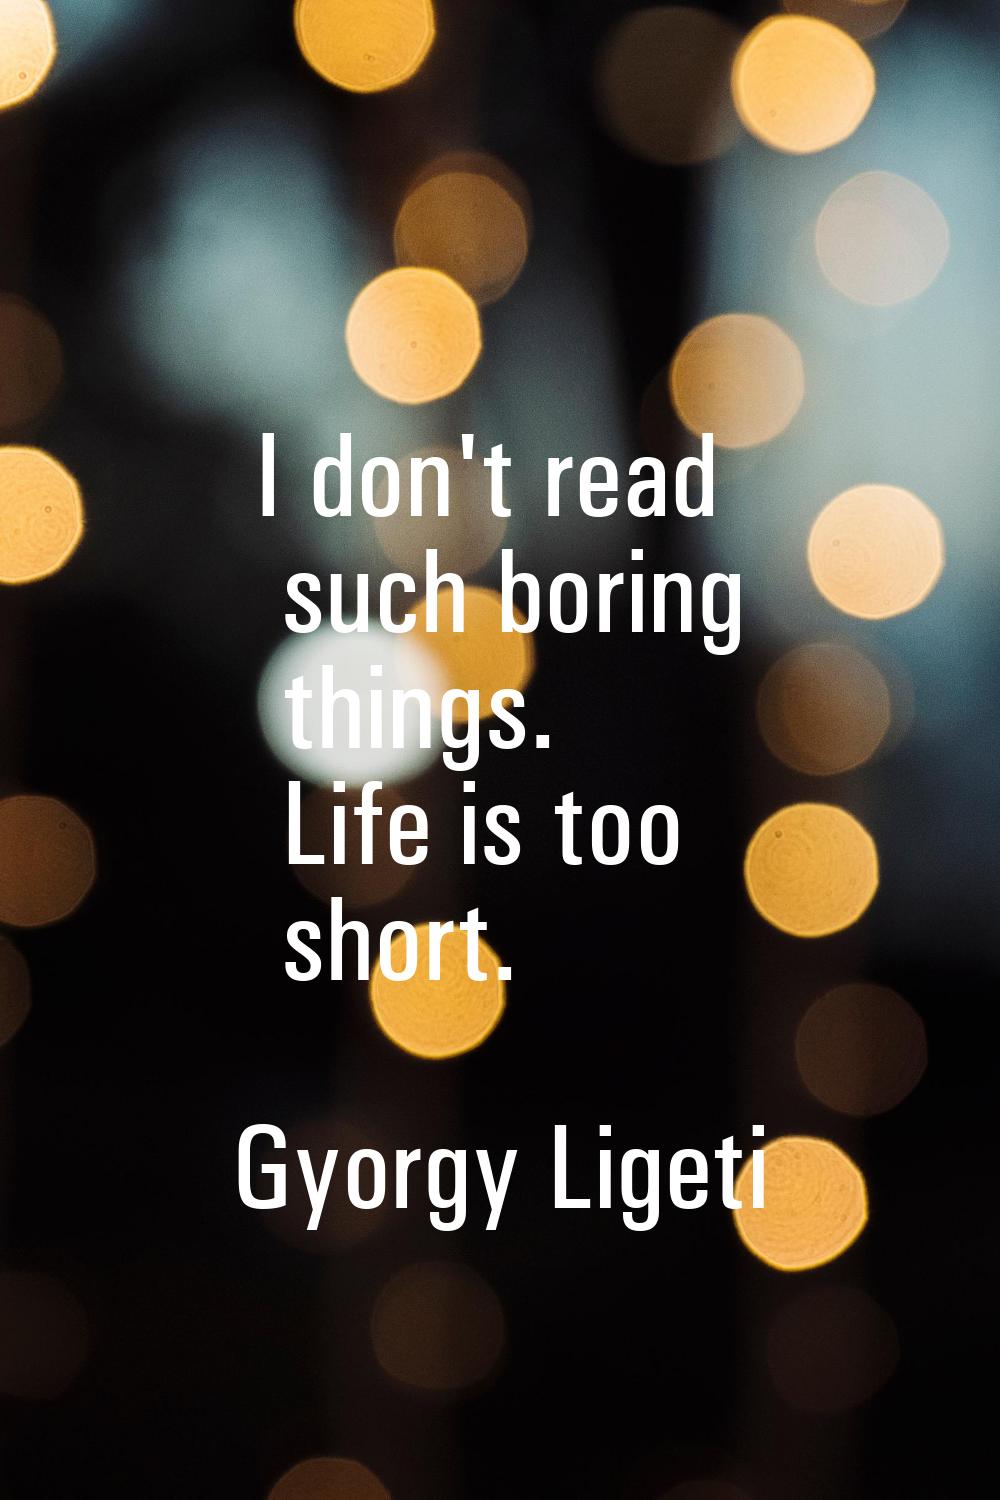 I don't read such boring things. Life is too short.